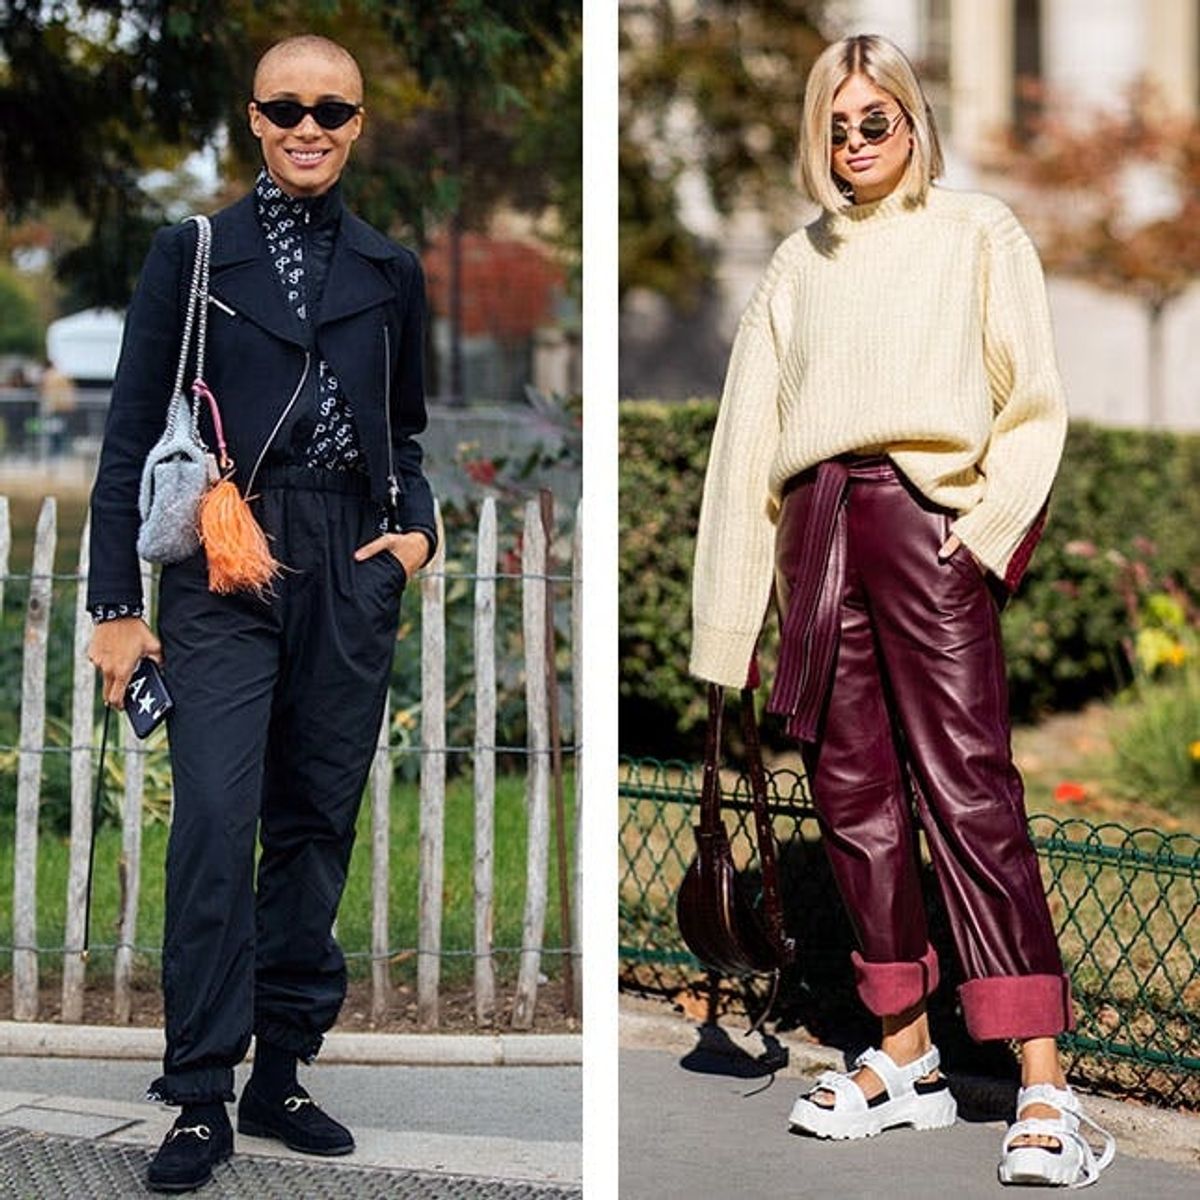 The Shoe Trends That Are In and Out for 2019